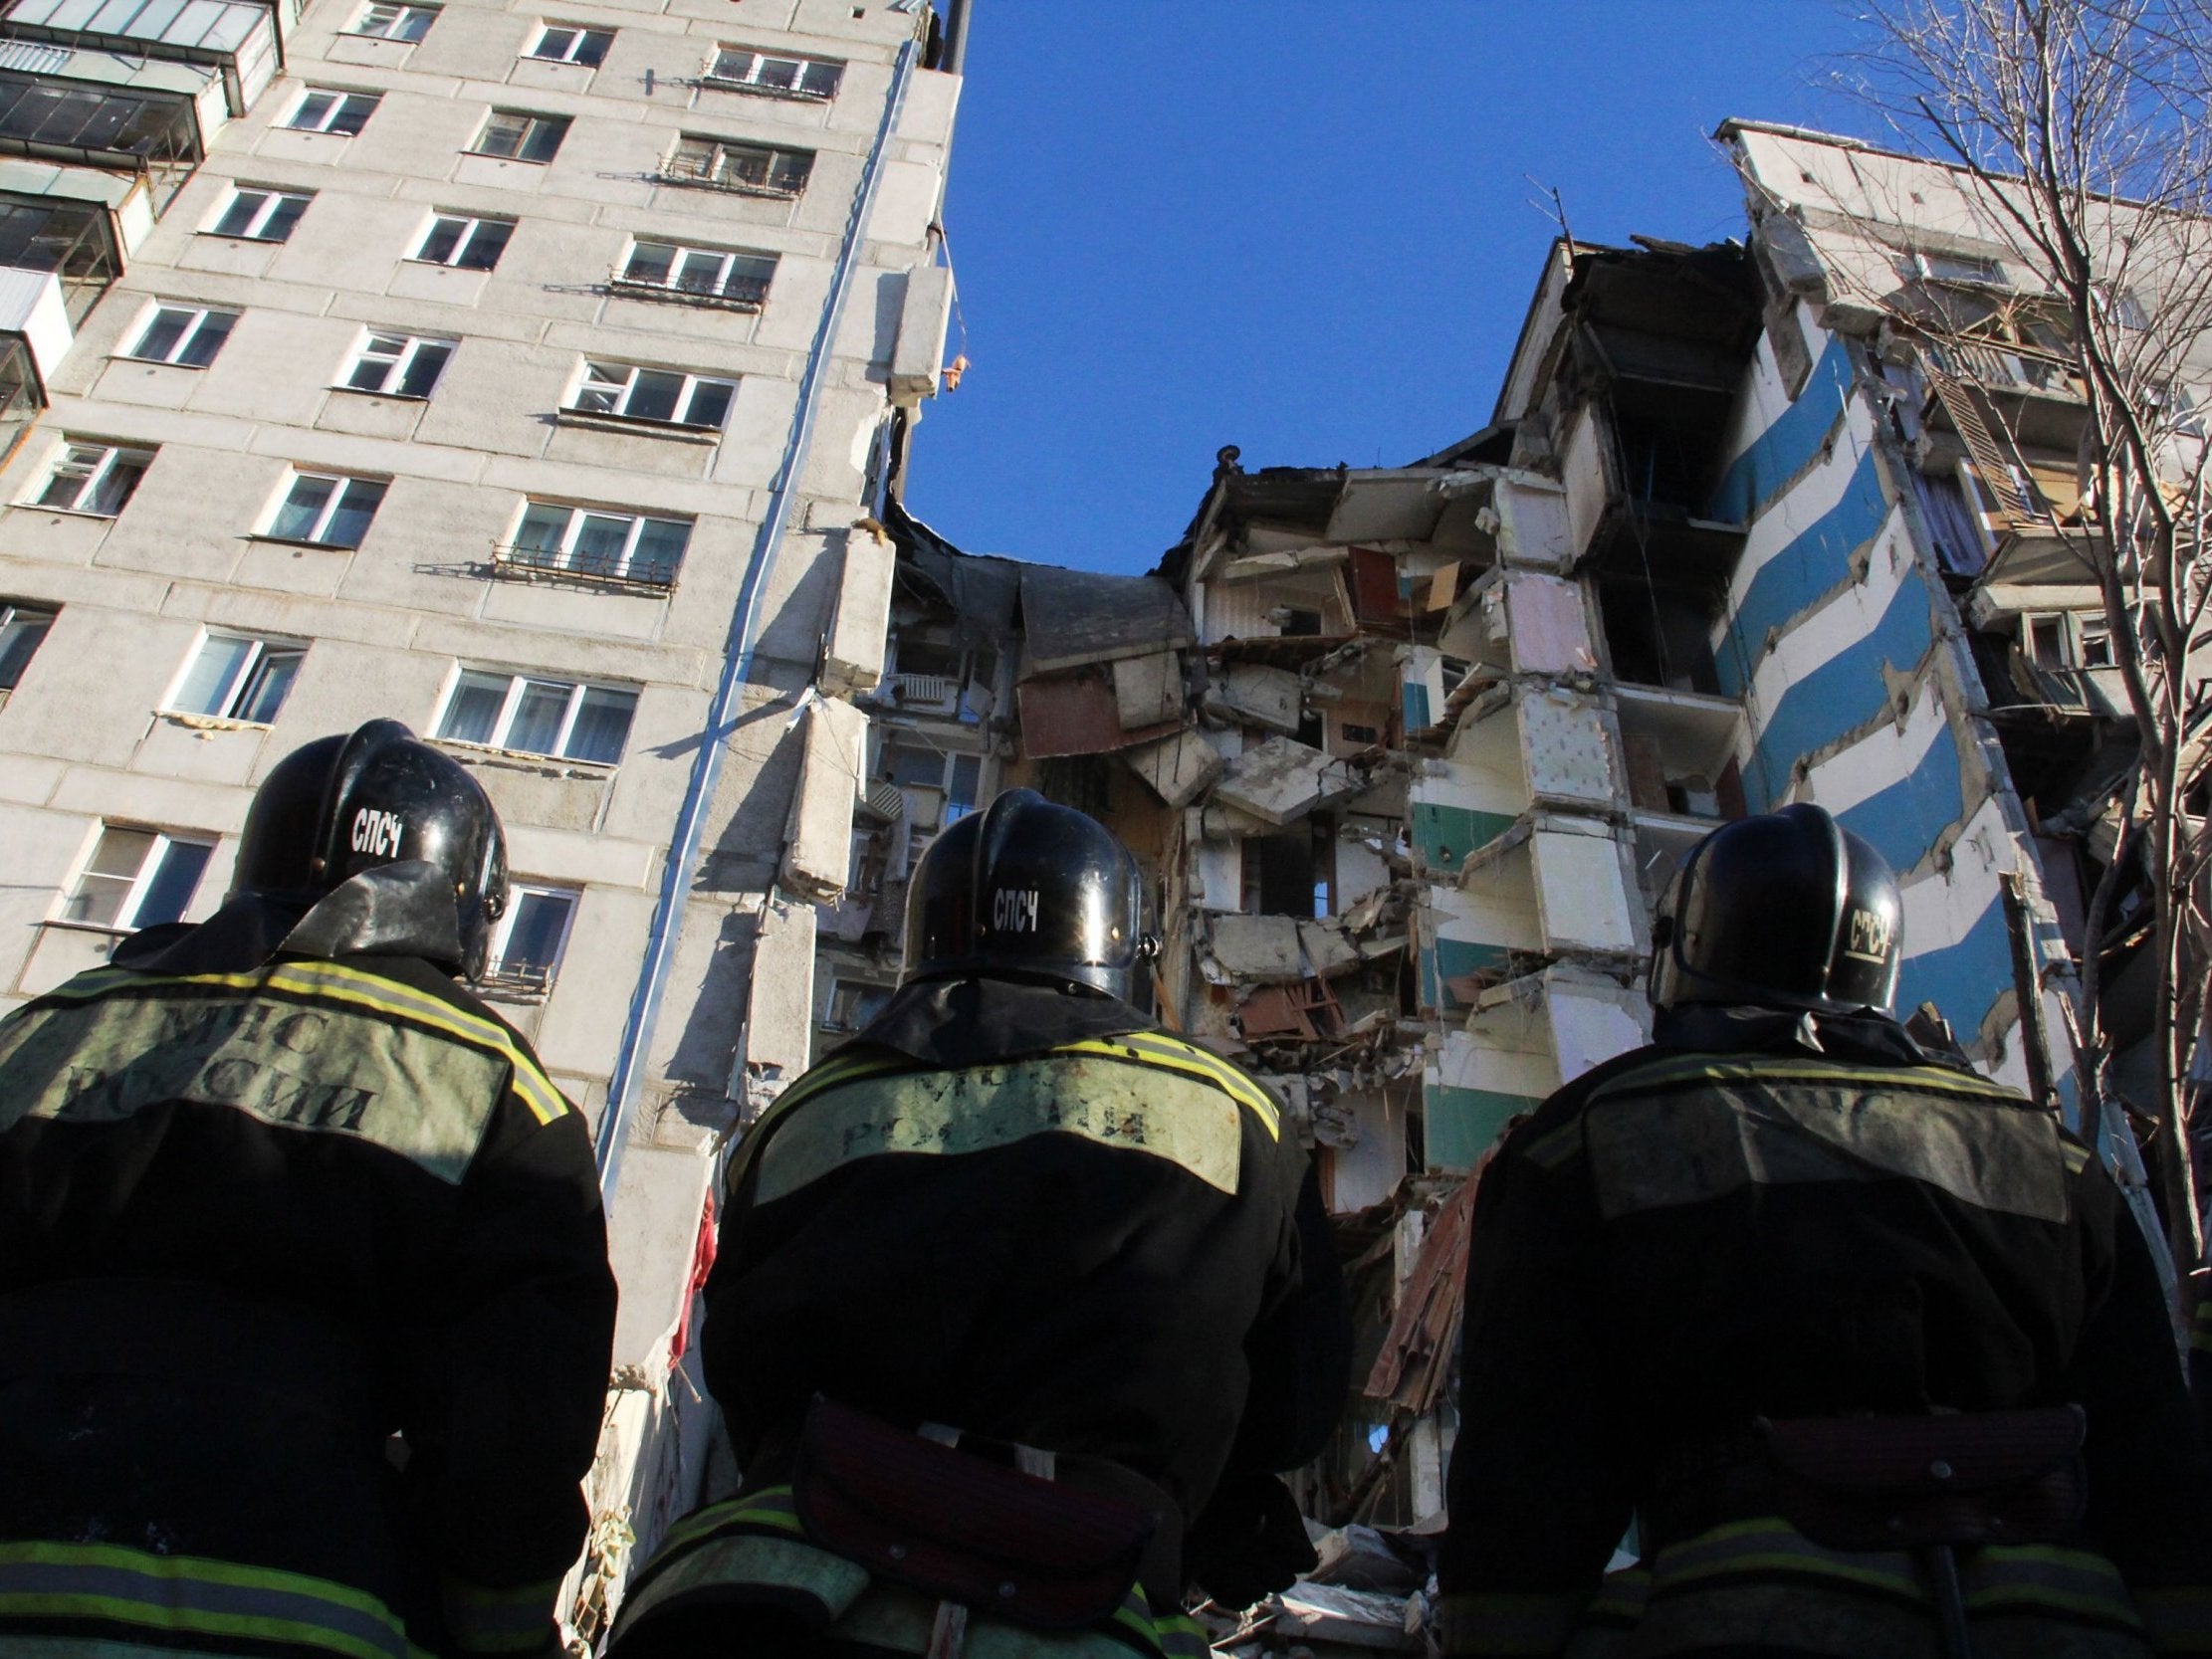 Firefighters stand during a rescue operation after a gas explosion rocked a residential building in Magnitogorsk on New Year’s eve